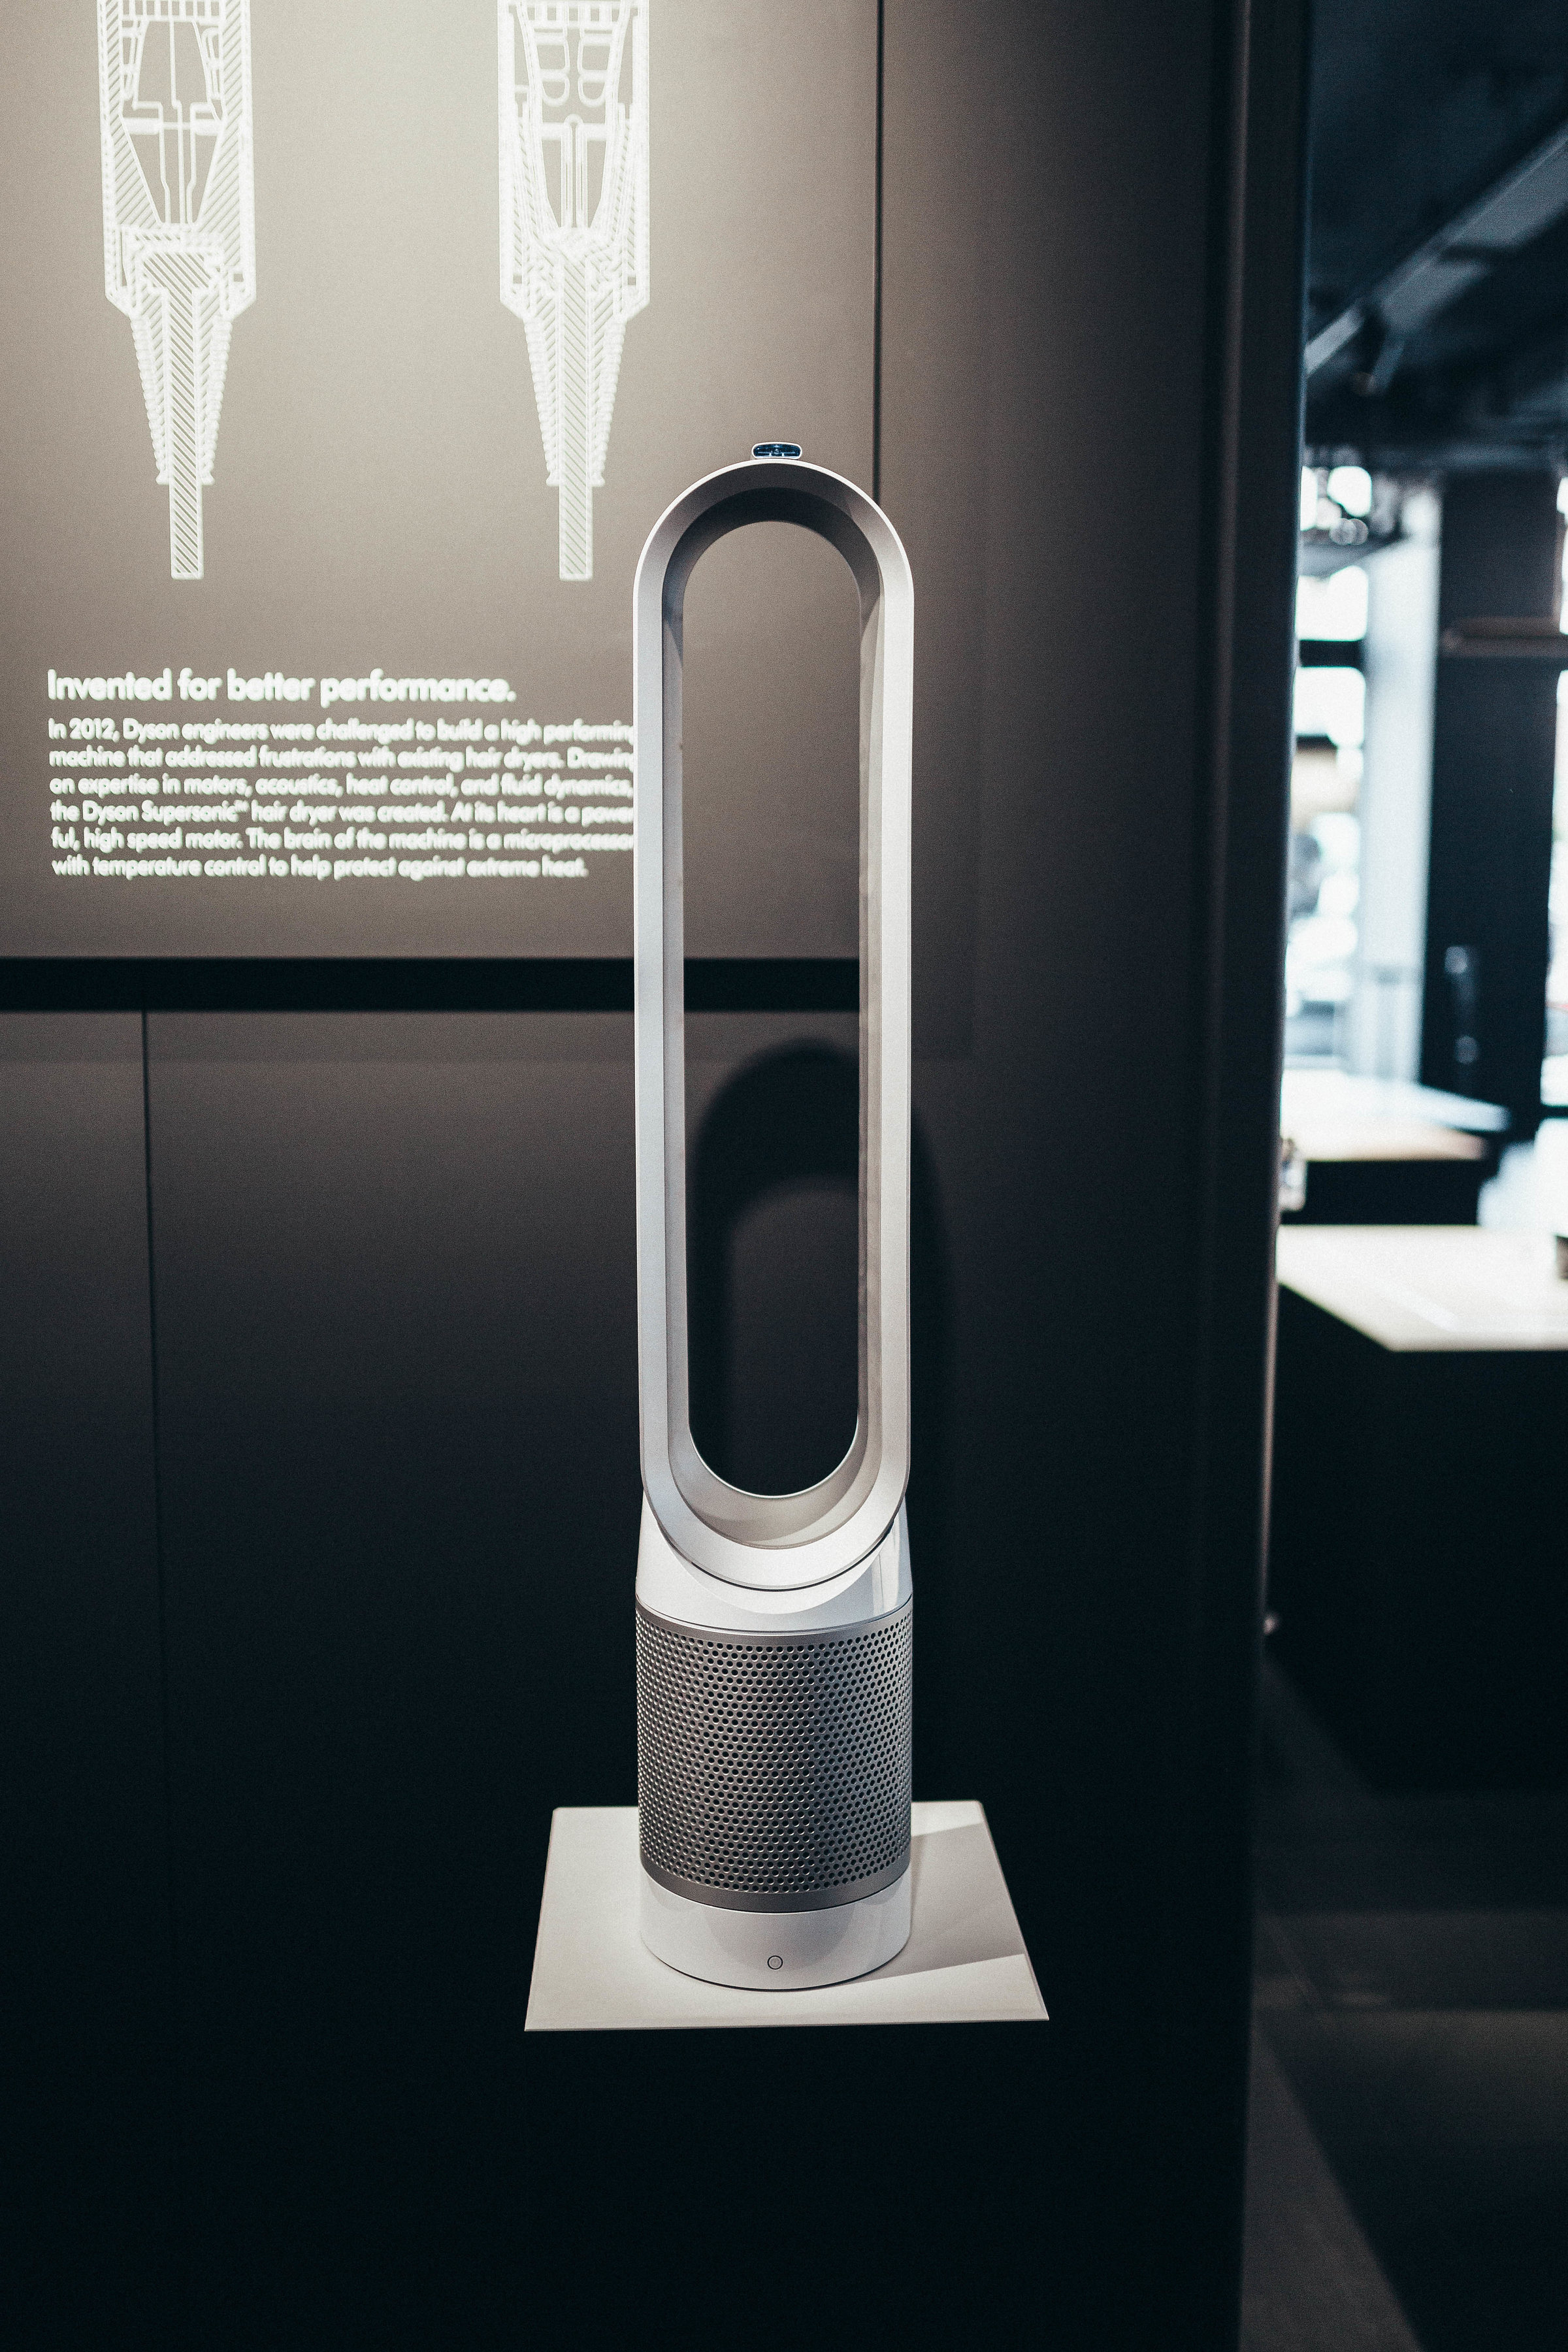 Ashley Zeal from Two Peas in a Prada shares her love for Dyson technology including the supersonic hair dryer and the air purifier. Plus an event in SF!